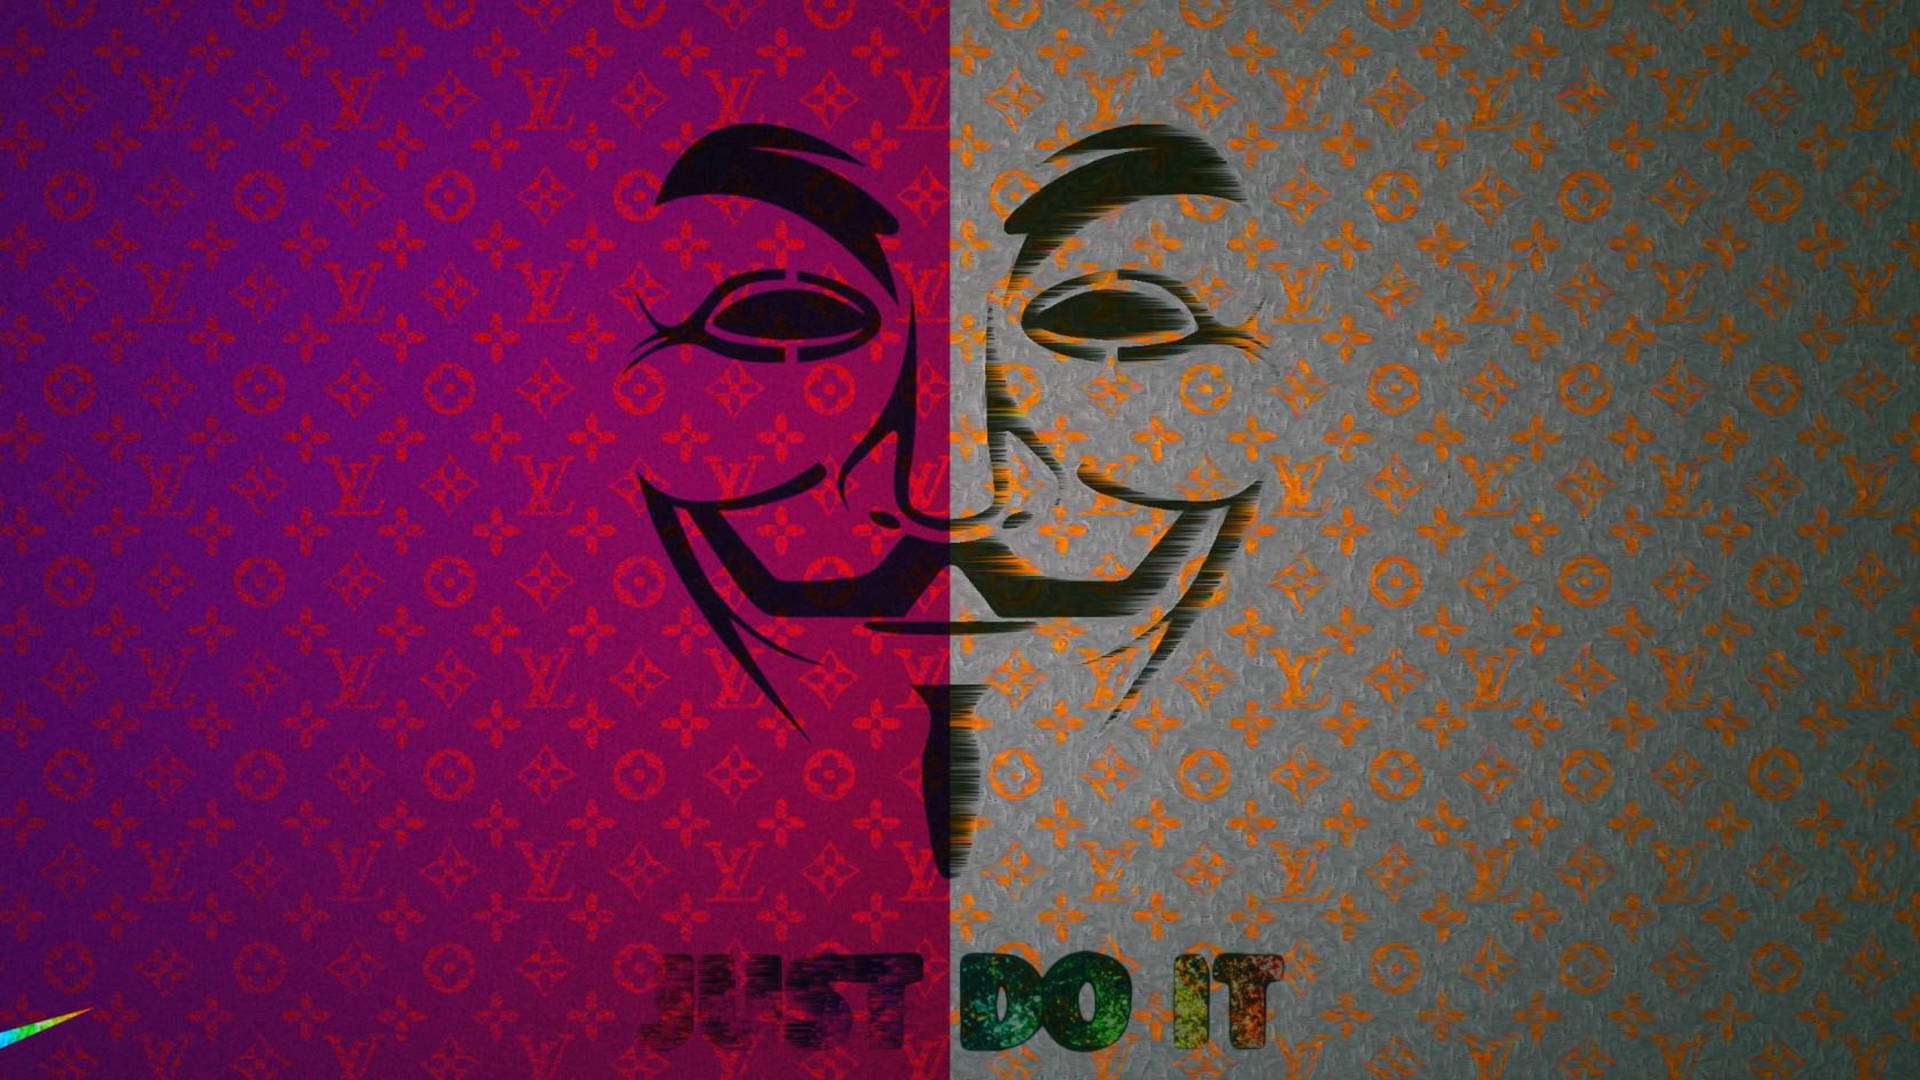 Empowerment Through Anonymity - Featuring Just Do It And Vendetta Art Background